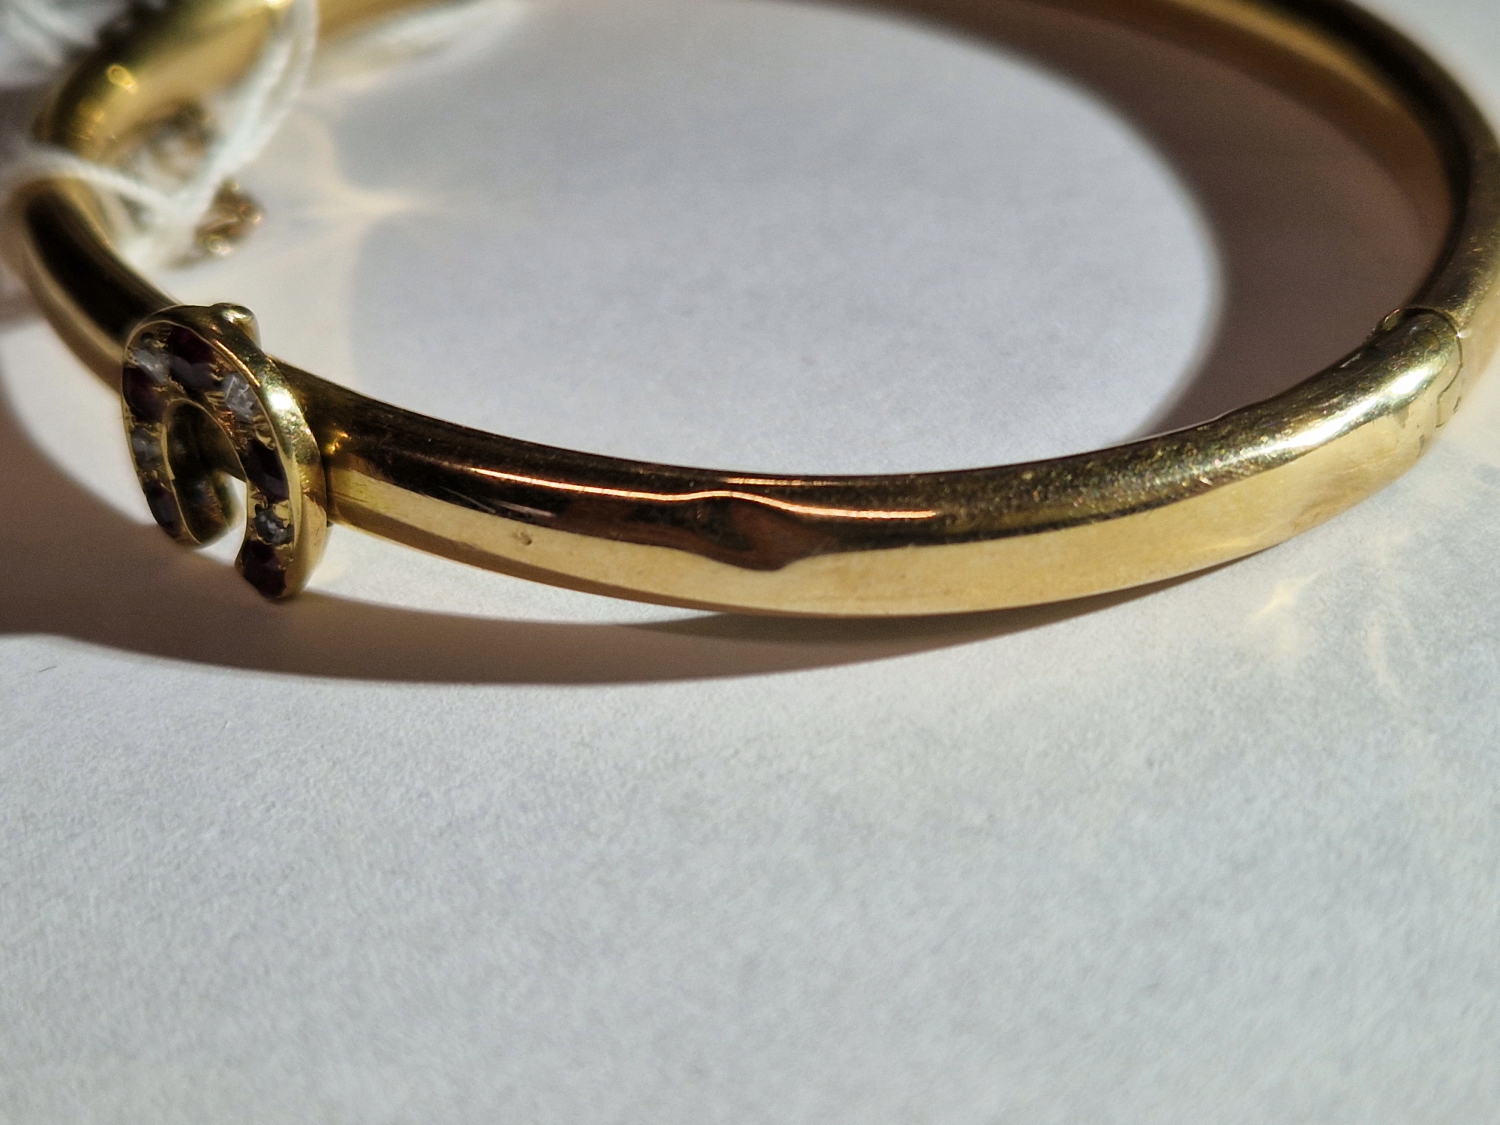 AN ANTIQUE BANGLE SET WITH A RUBY AND DIAMOND HORSESHOE. THE HINGED BANGLE UNHALLMARKED, ASSESSED AS - Image 5 of 8